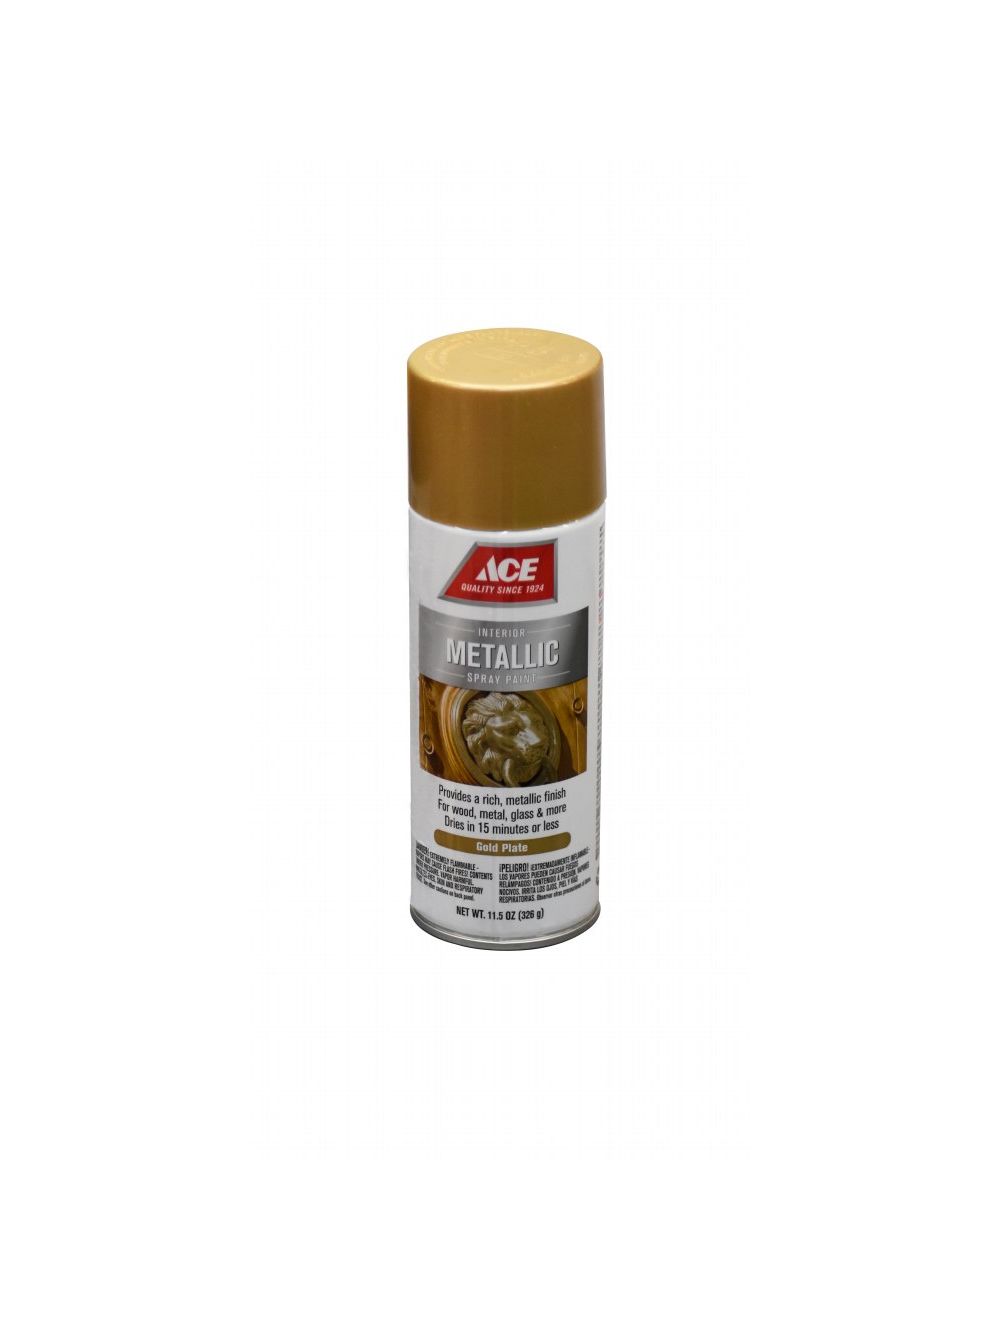 VINTAGE 11655 GOLD PLATE METALLIC SPRAY PAINT BEST QUALITY ACE HARDWARE